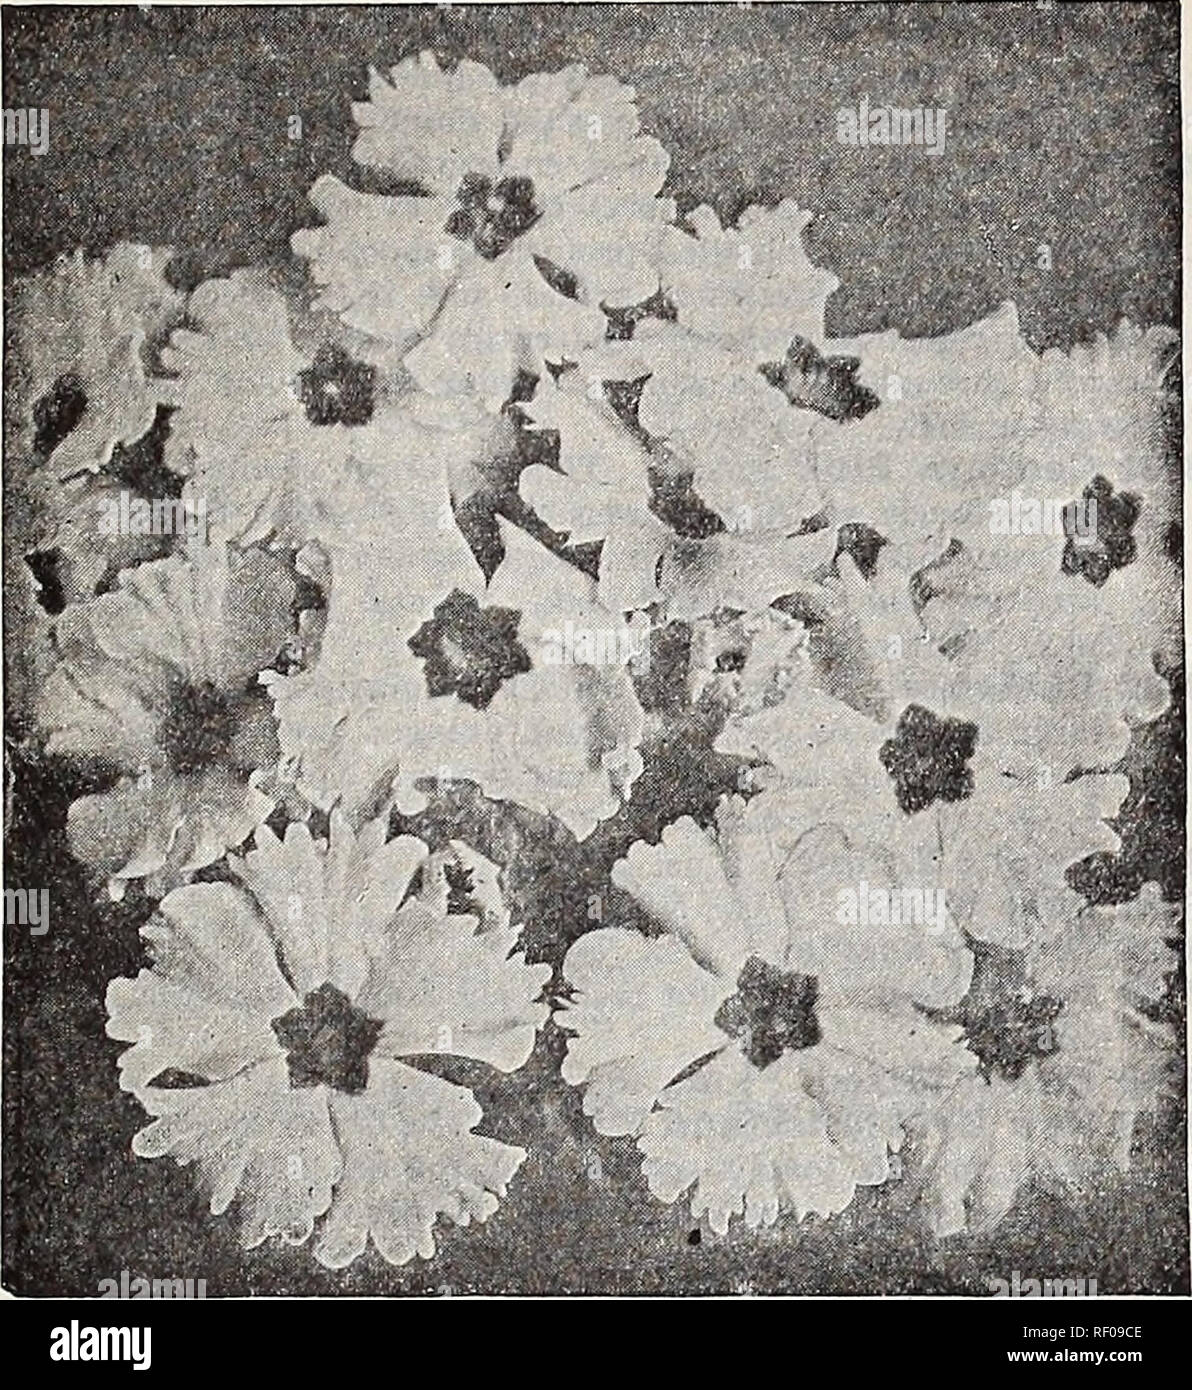 . Dreer's midsummer list 1932. Flowers Seeds Catalogs; Fruit Seeds Catalogs; Vegetables Seeds Catalogs; Nurseries (Horticulture) Catalogs; Gardening Equipment and supplies Catalogs. DREER'S FLOWER SEEDS FOR SUMMER SOWING 17. : Dreer's &quot;Peerless&quot; Chinese Primroses Primula (Primrose) The charming and beautiful Chinese Fringed Primrose and Obconica varieties are indispensable for winter or spring decora- tions in the home or conservatory. They are one of the most im- portant winter blooming pot plants. Dreer's &quot;Peerless&quot; Chinese Primroses PER pkt. 3784 Peerless Blue (True Blue Stock Photo